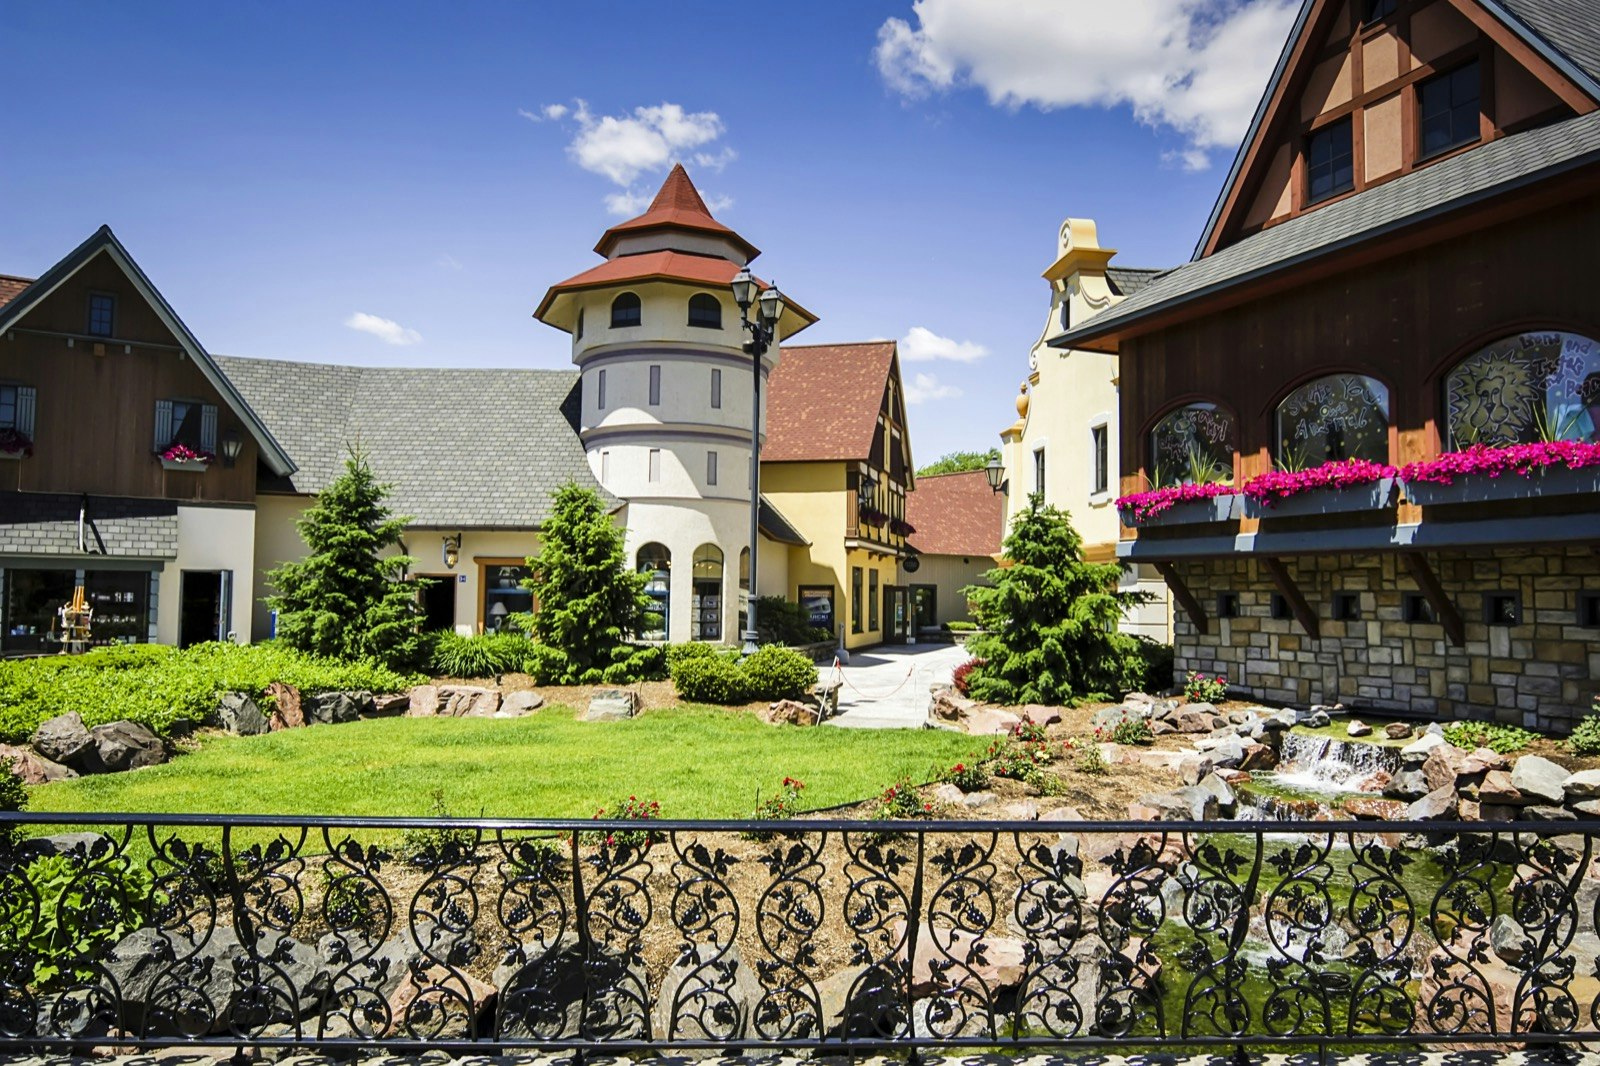 The Bavarian-style town of Frankenmuth; Great Lakes road trip